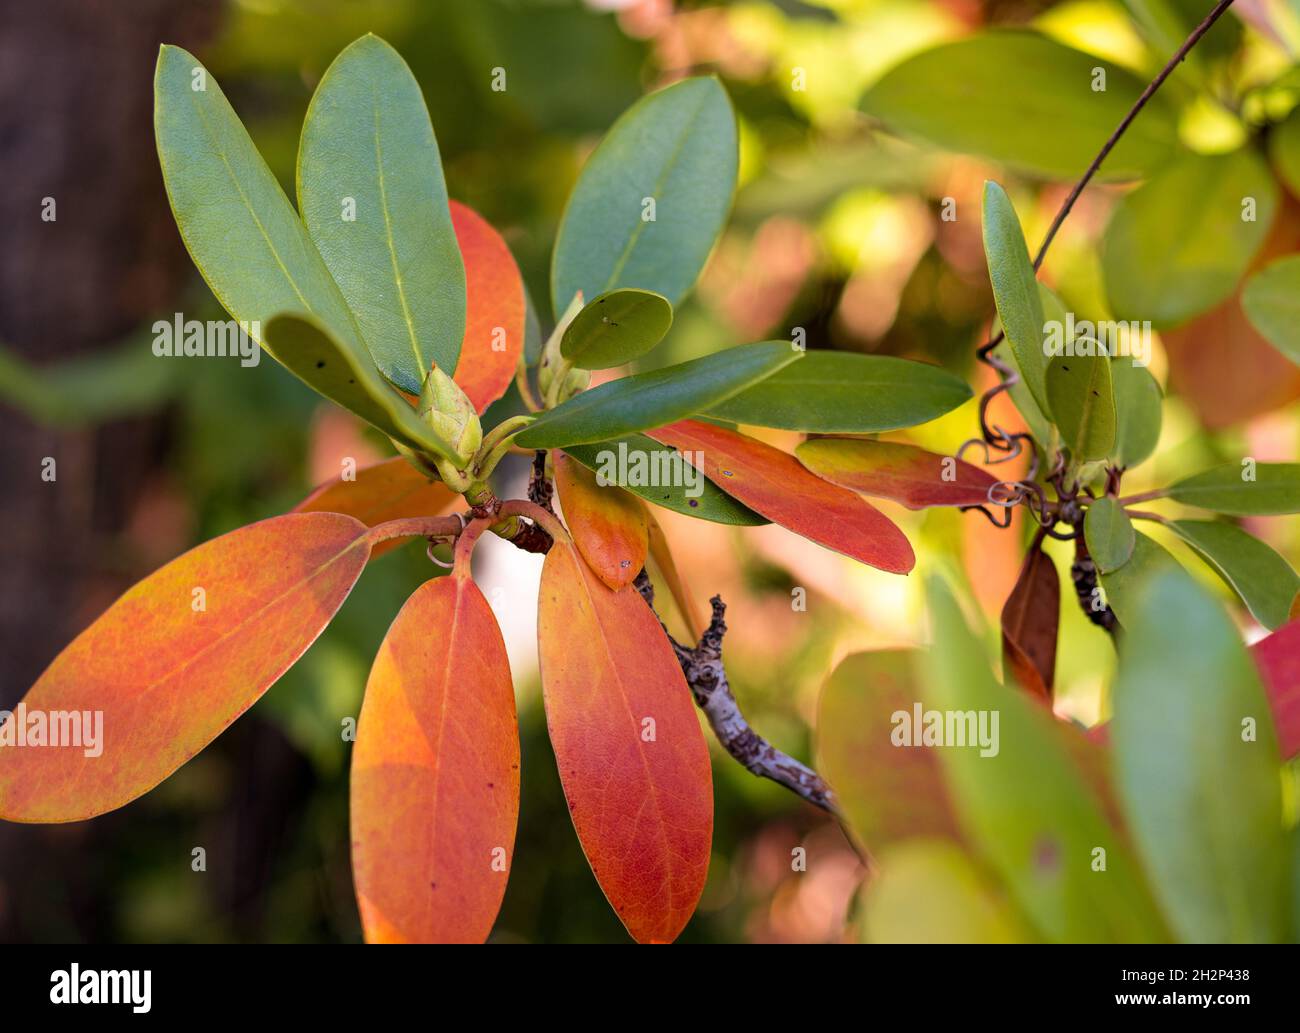 Colorfull Rhododendron leaves in the Autumn garden. Rhododendron Catawbiense Grandiflorum. Stock Photo